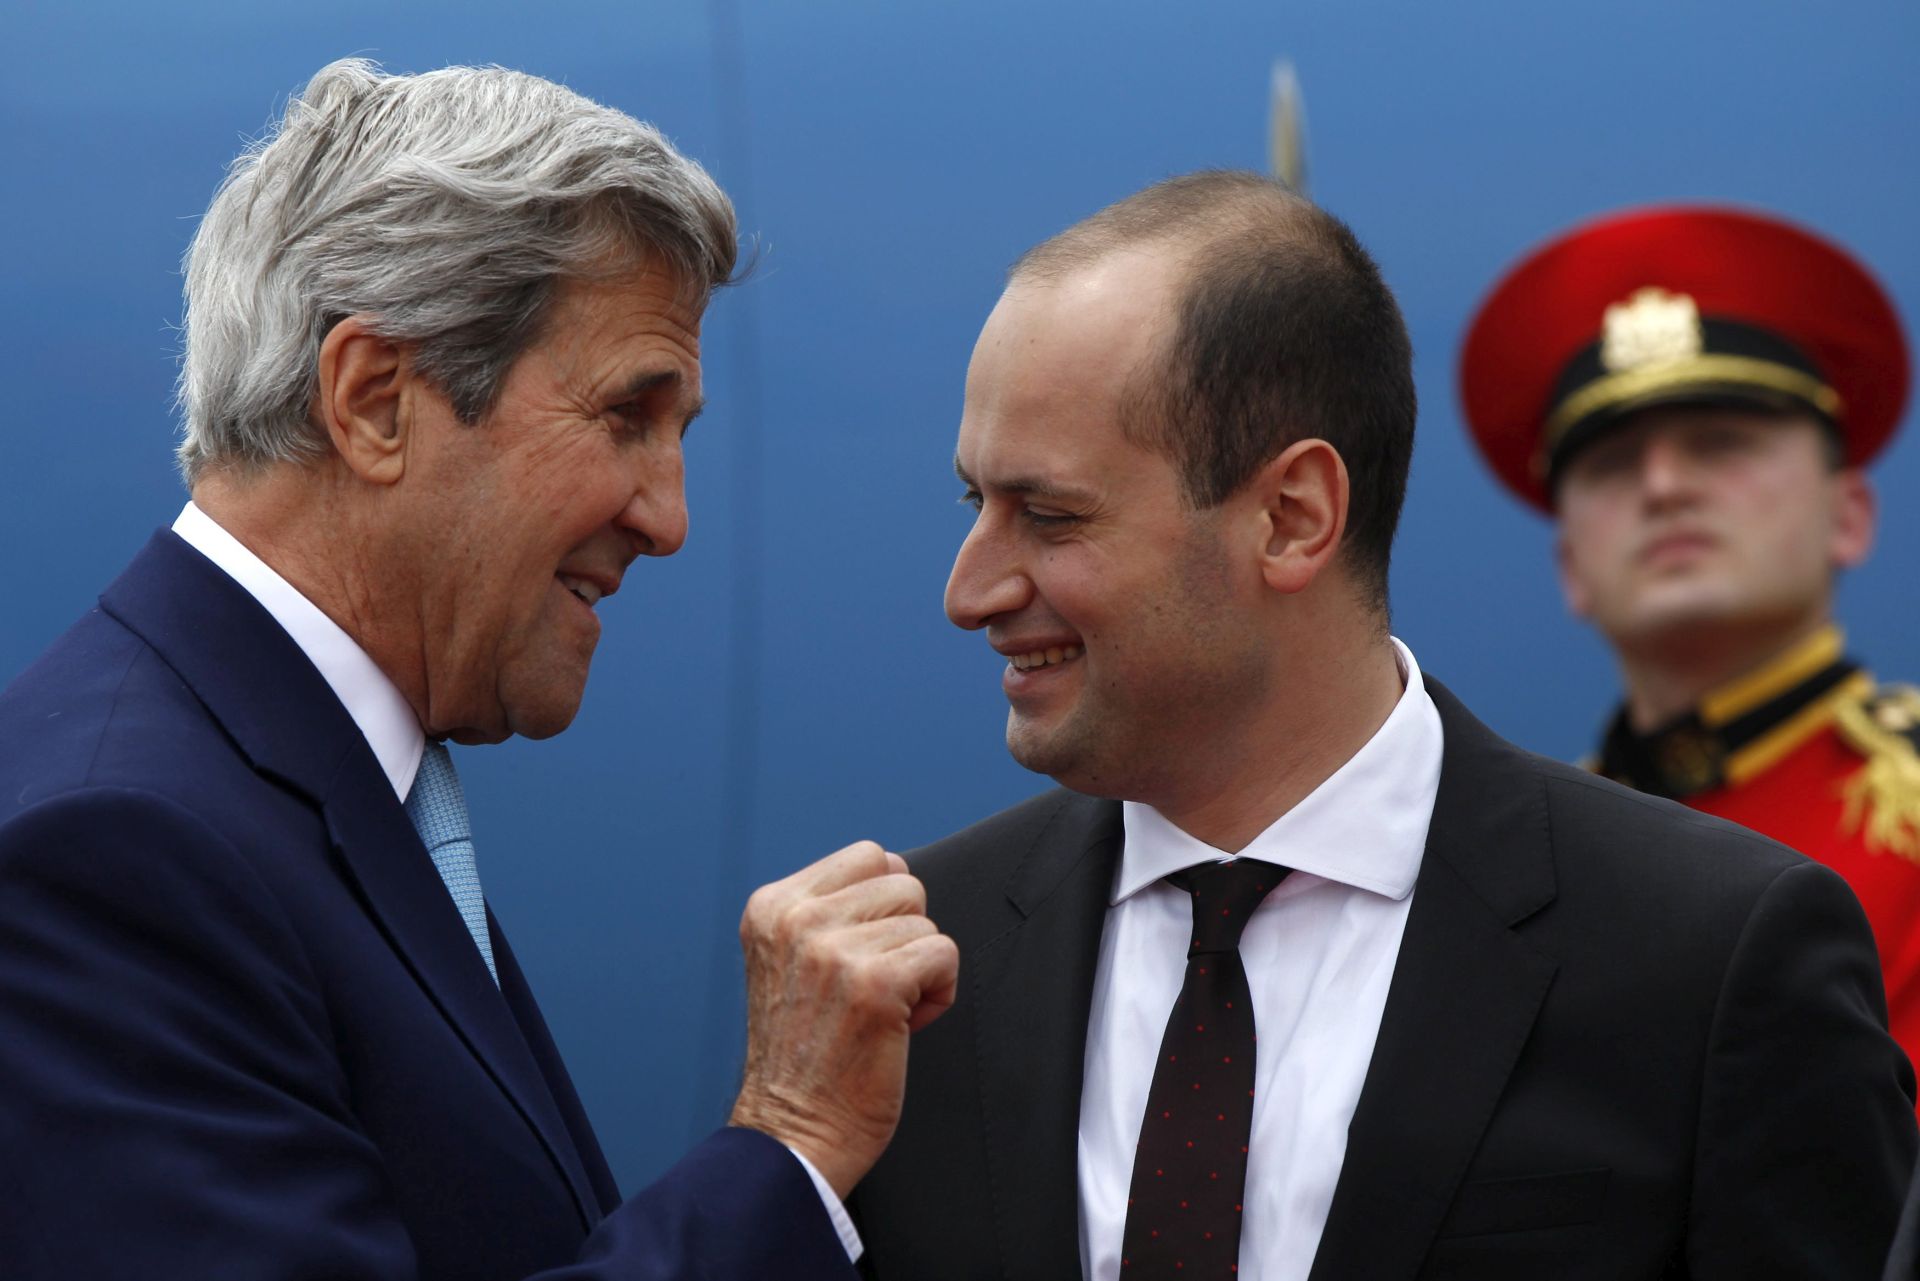 epa05410120 US Secretary of State John Kerry (L) speaks with Georgia's Foreign Minister Mikheil Janelidze (R) as he arrives in Tbilisi, Georgia, 06 July 2016. Kerry is in Georgia for a two-day working visit.  EPA/DAVID MDZINARISHVILI/POOL